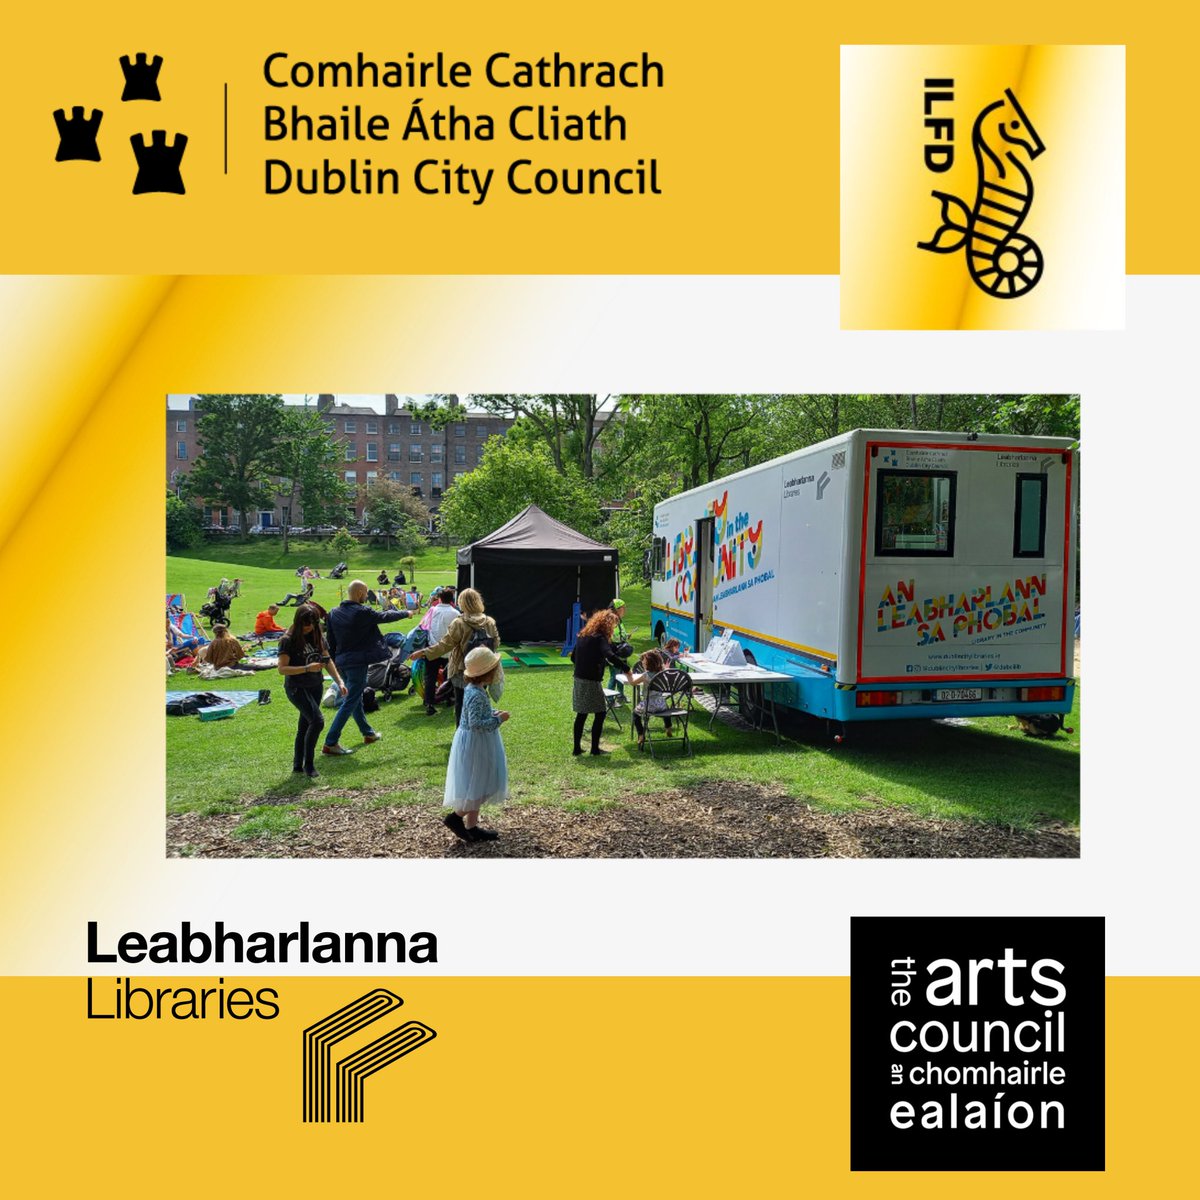 The Library Bus will be at the International Literature Festival Dublin on Sat 18, Sun 19 and Sat 25 and Sun 26 May from 10 - 4pm. Drop by to say hello, join the library. Books, games and competitions for everyone! Any books borrowed can be returned to your local library.